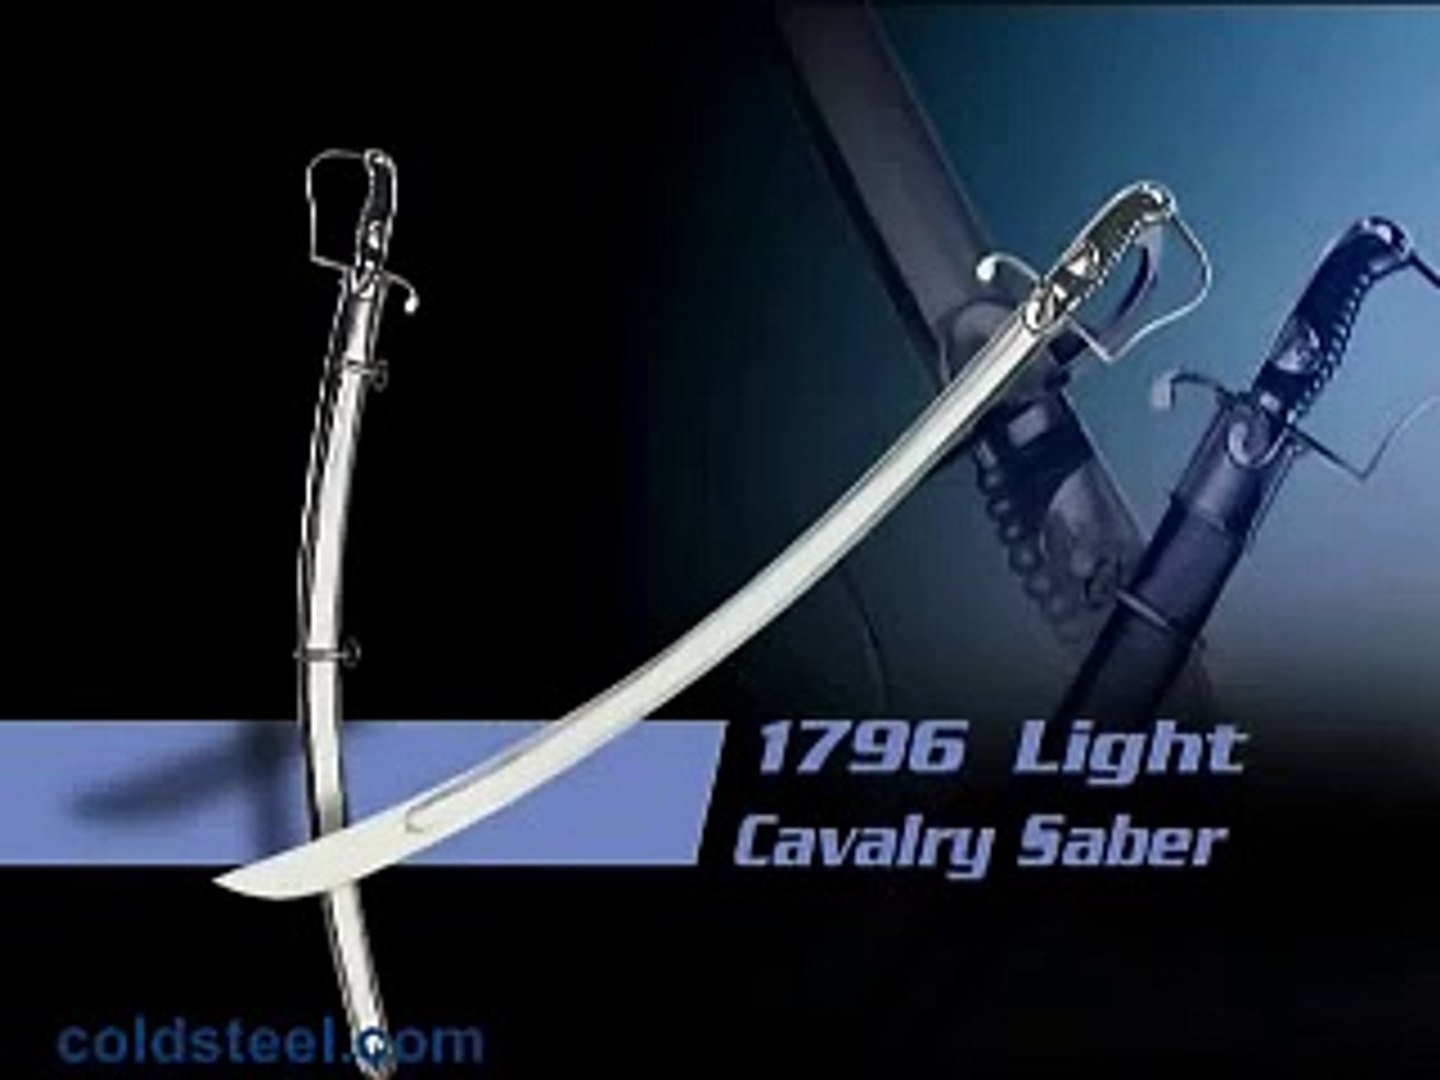 Cold Steel 1796 Light Cavalry Saber - video Dailymotion